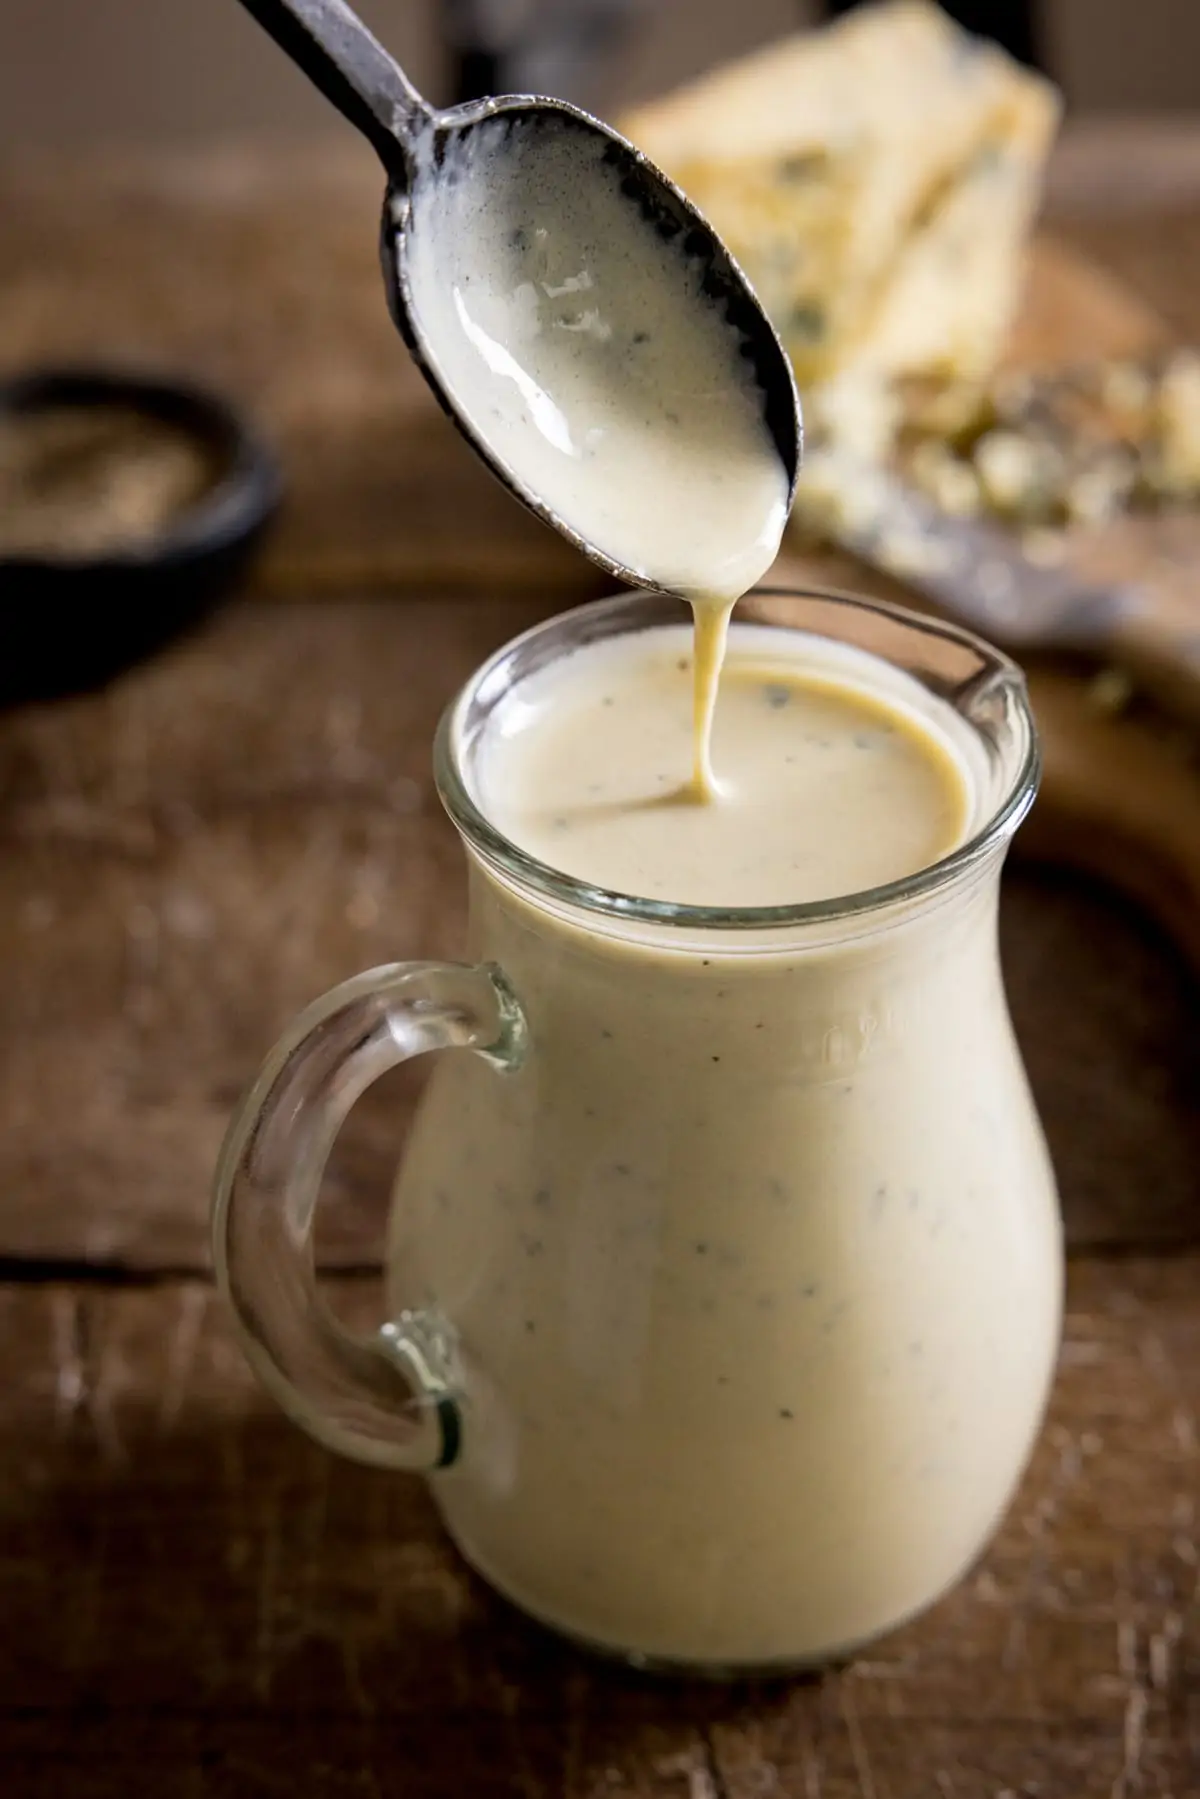 Some blue cheese sauce being spooned into a jug for serving.